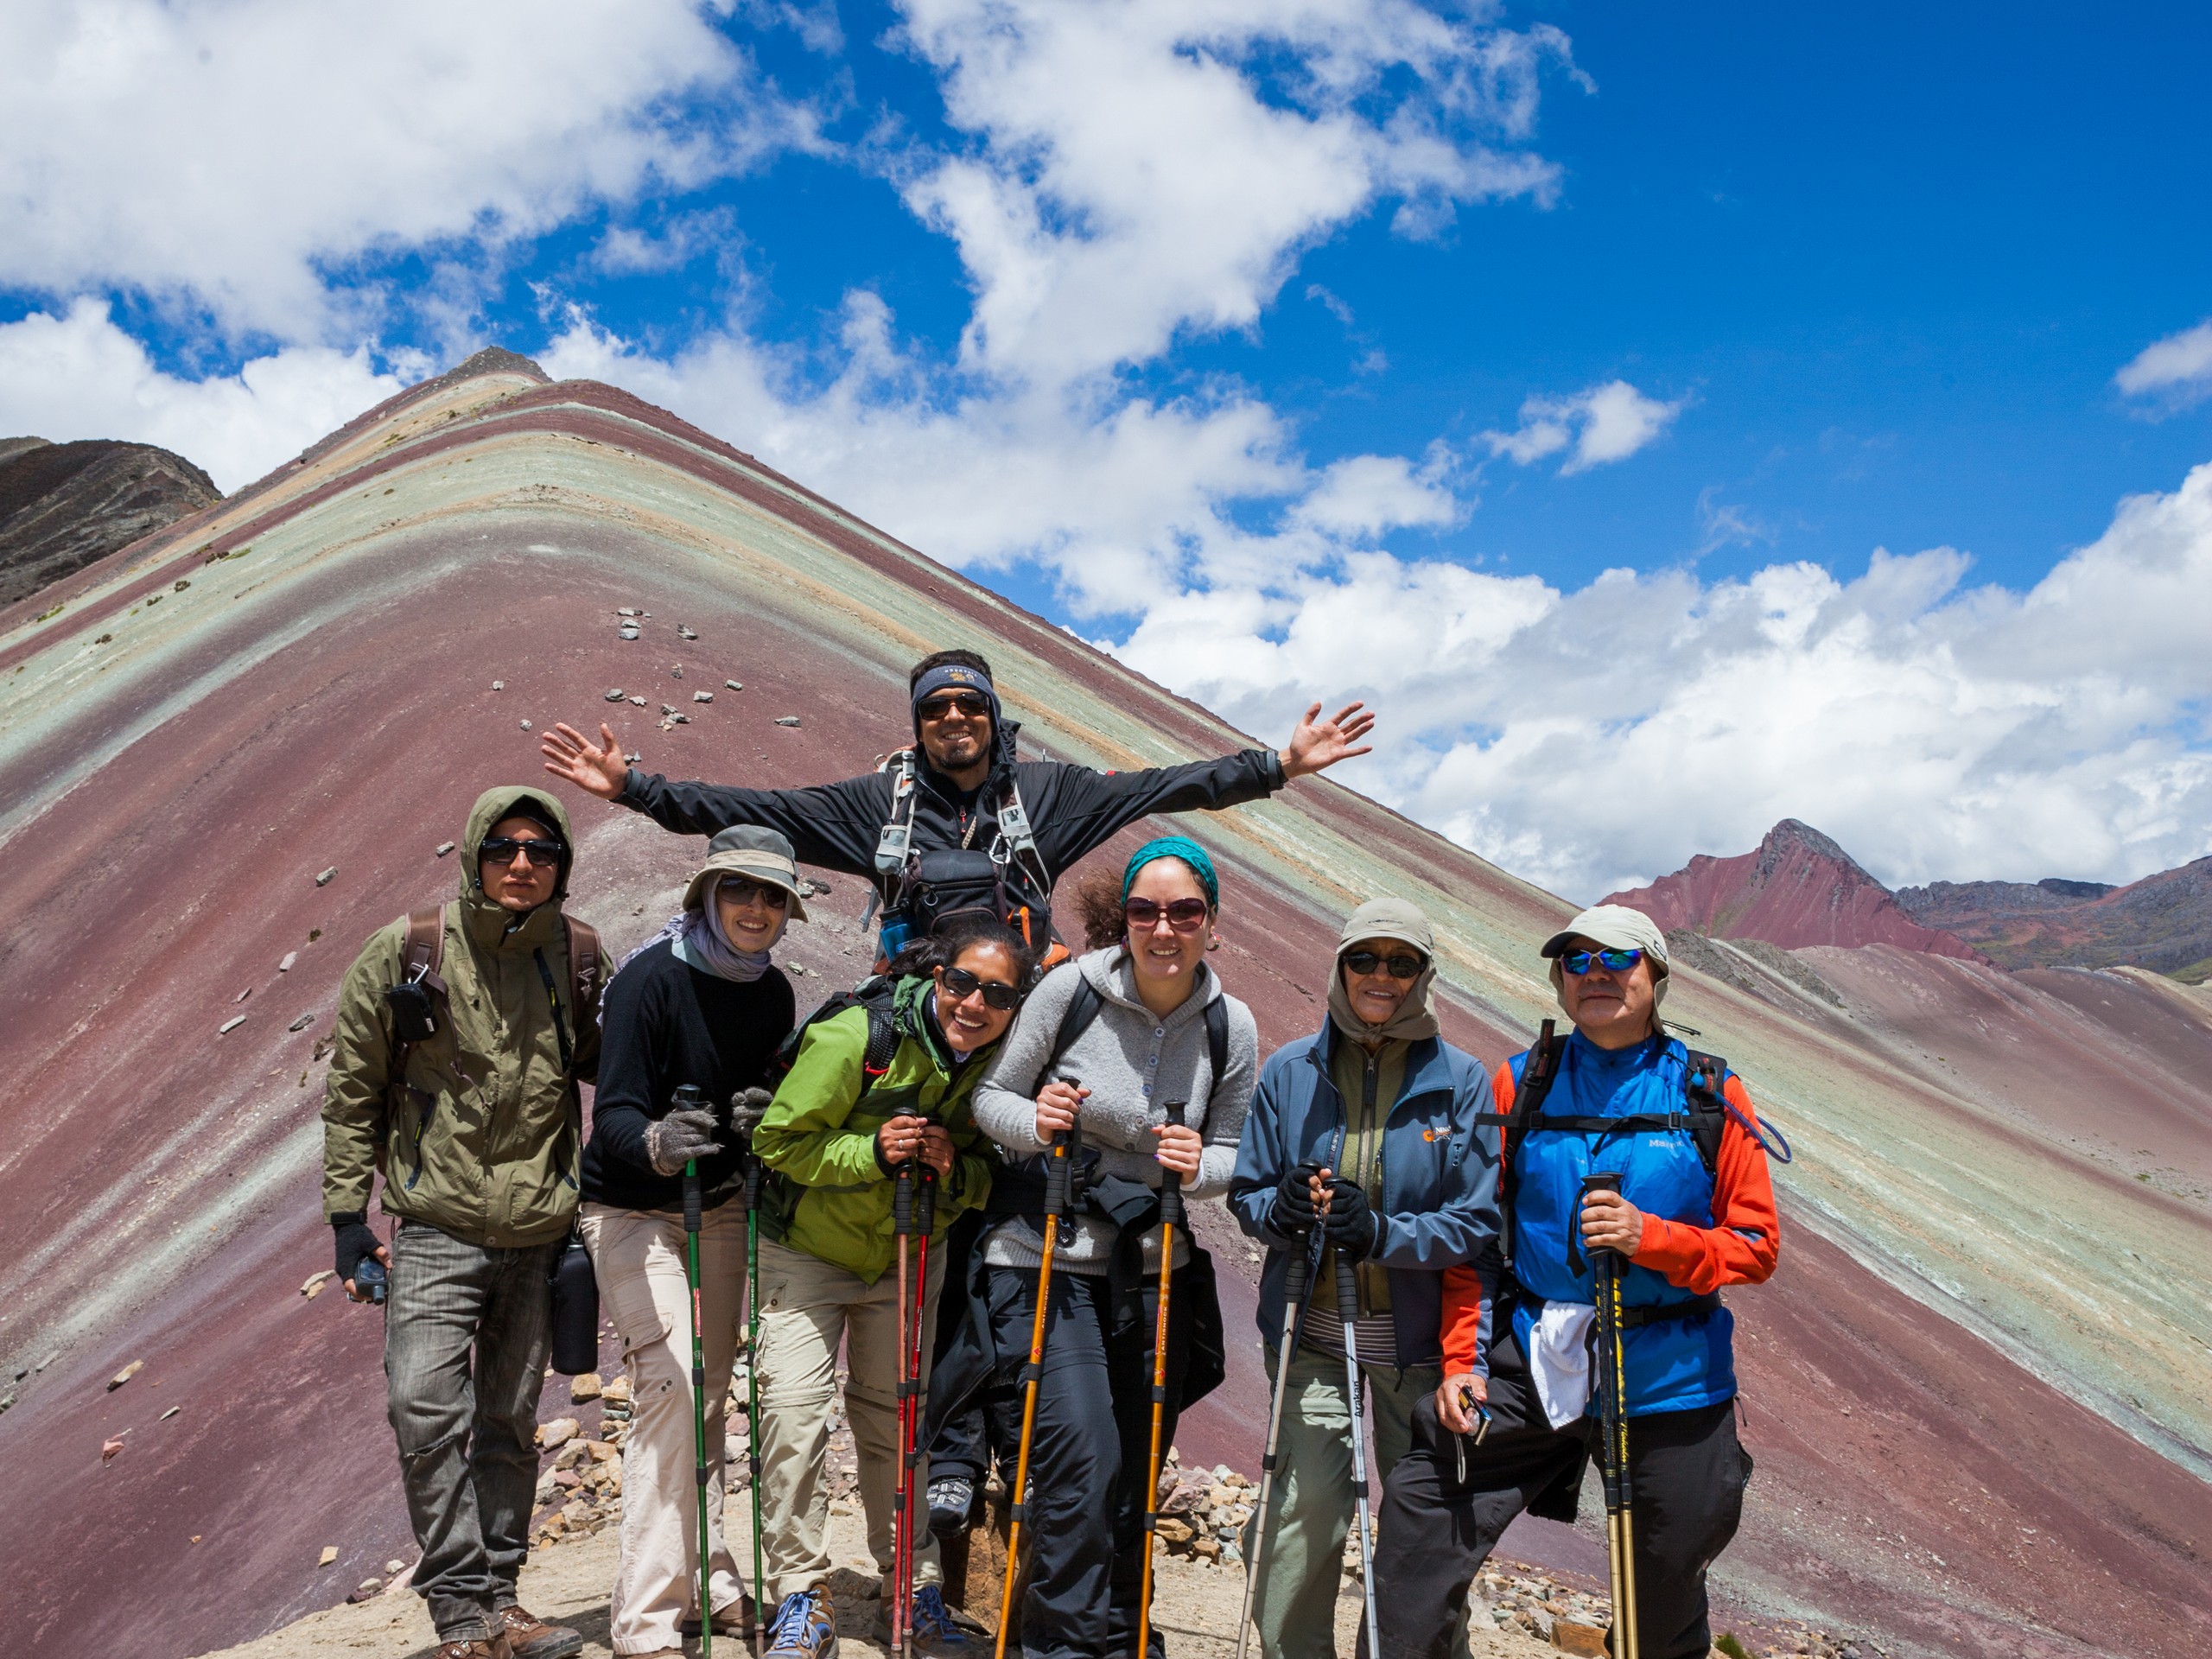 Group photo in Vinicunca